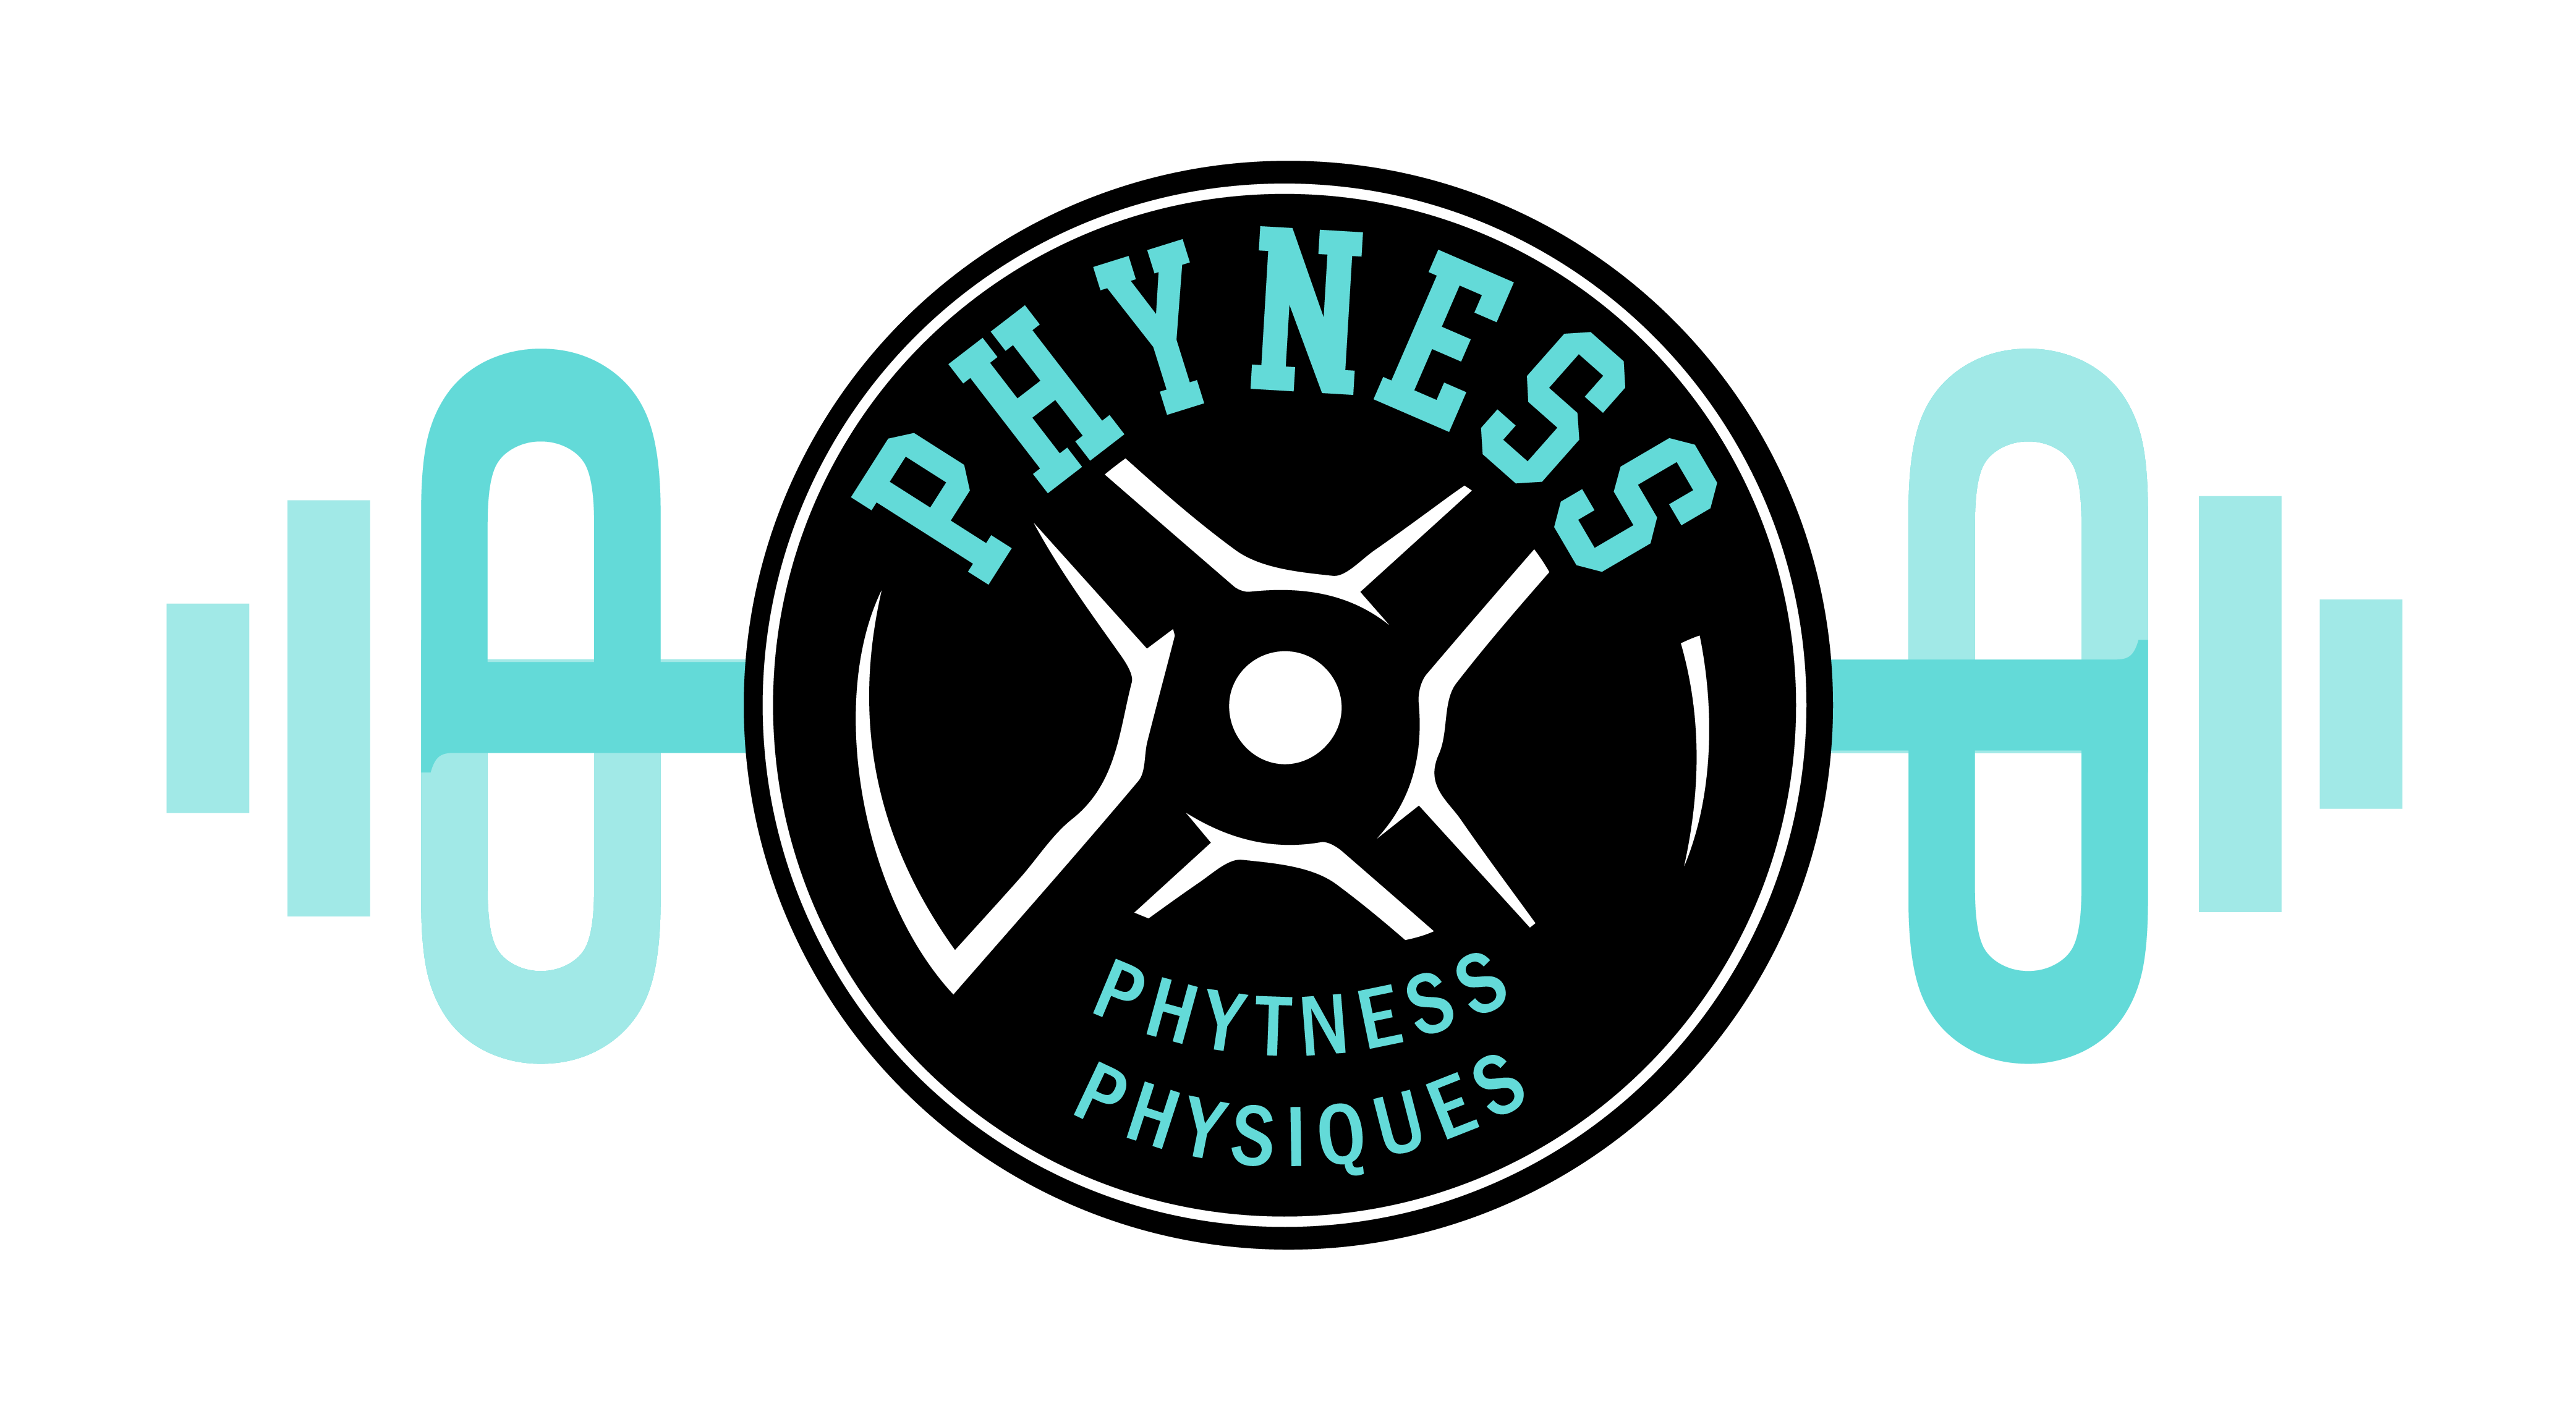 Phyness Phytness Physiques